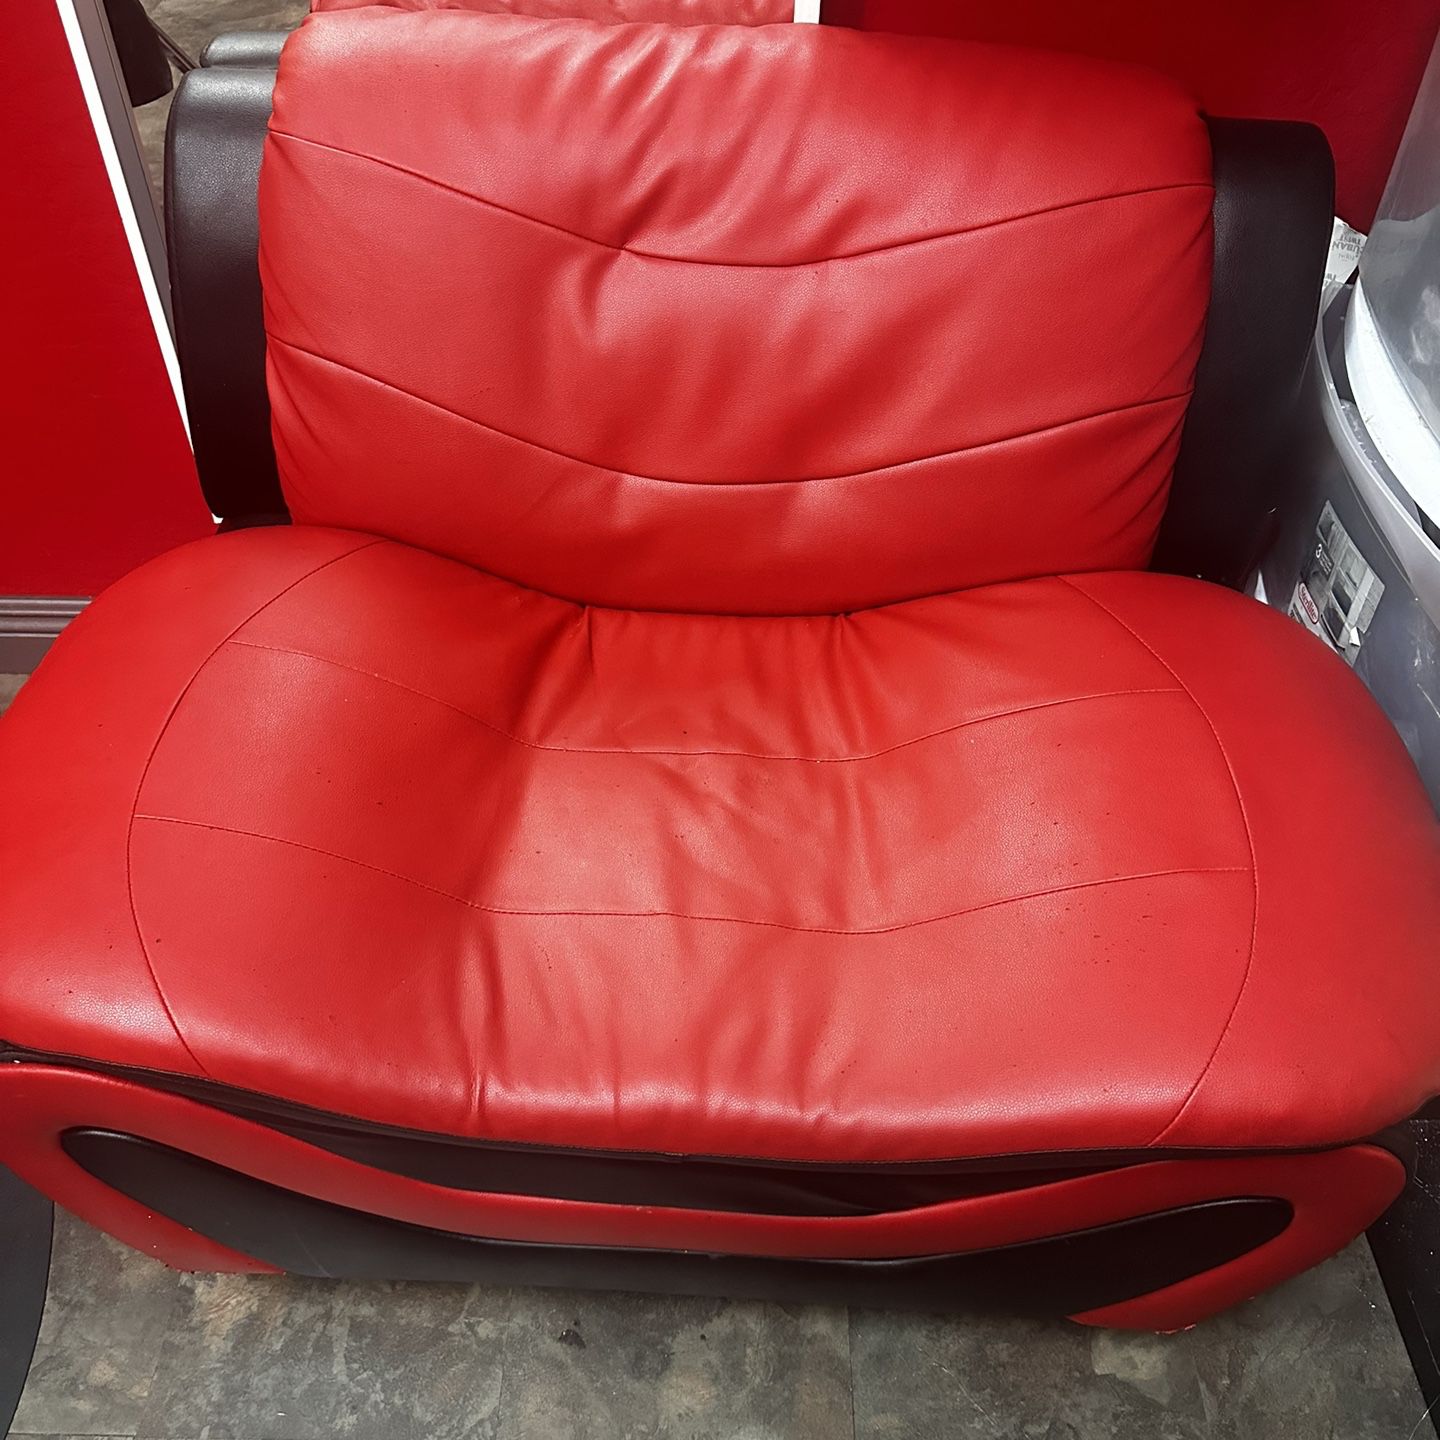 Red Leather Couches 